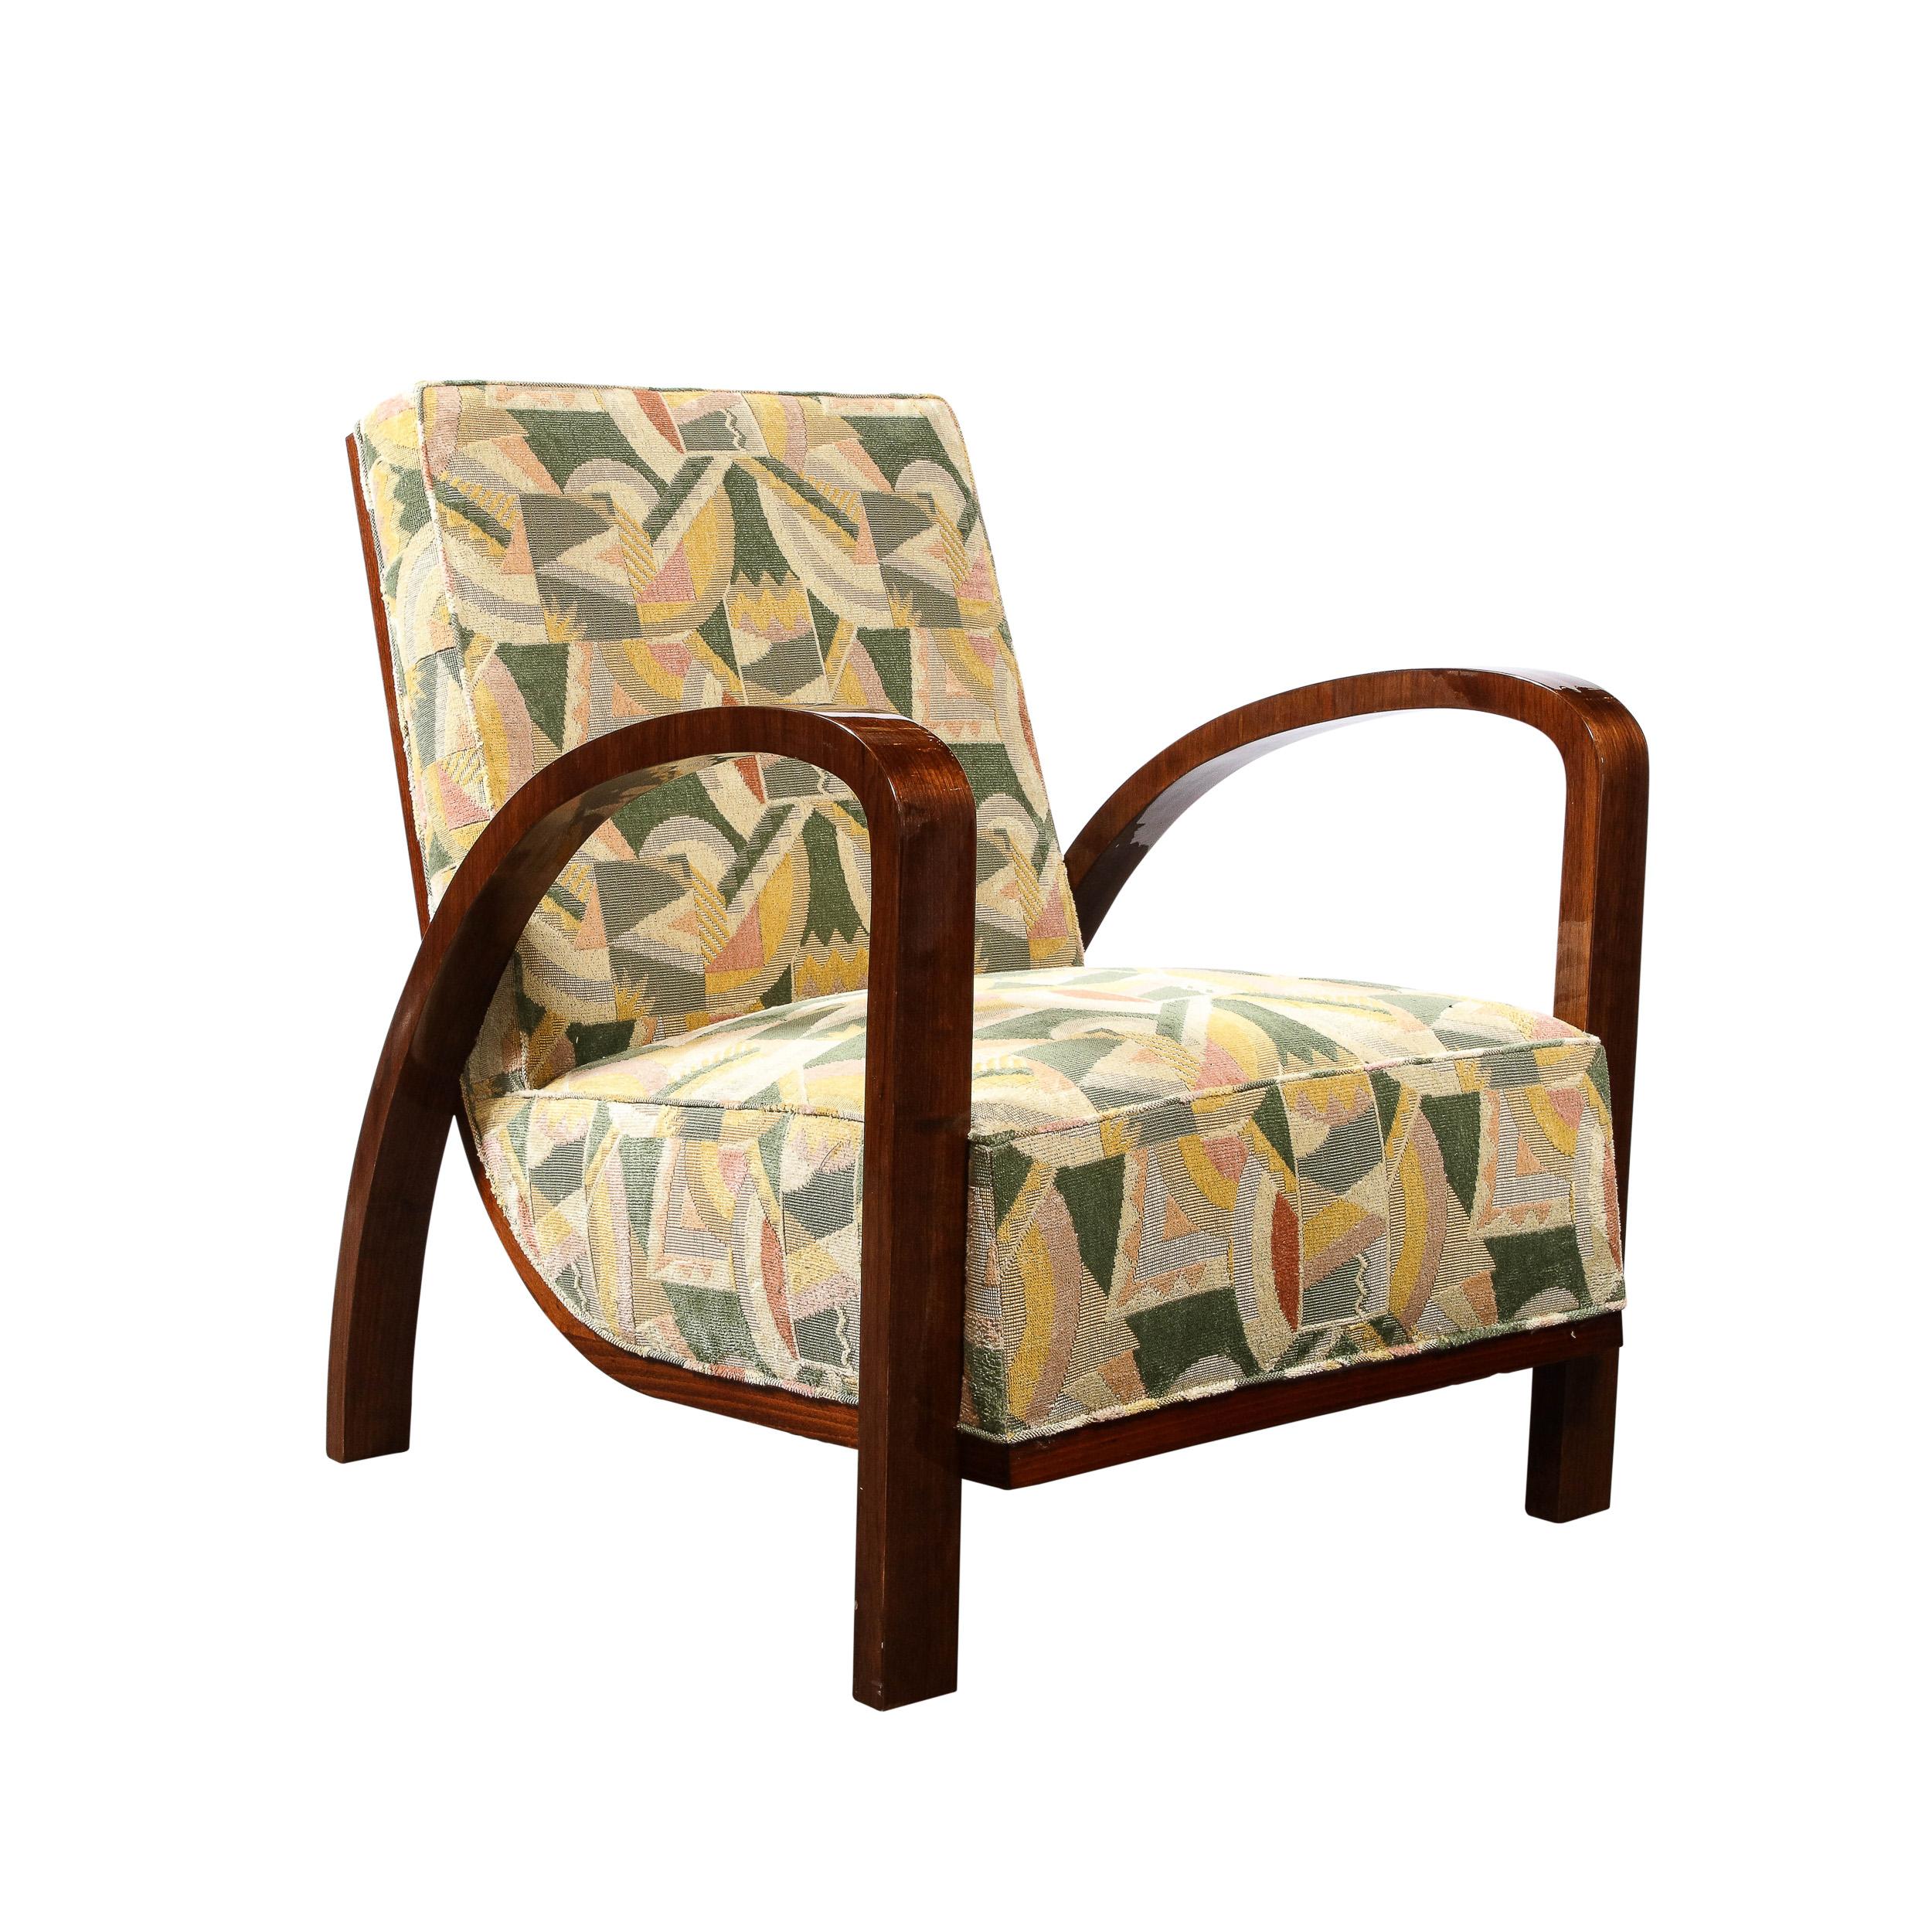 This stunning Pair of Art Deco Halabala Arm Chairs in Walnut & Clarence House Upholstery originate from France, Circa 1935. They feature gorgeously curved arm rests in sculpted walnut that serve to support the main body of the chairs. The body of